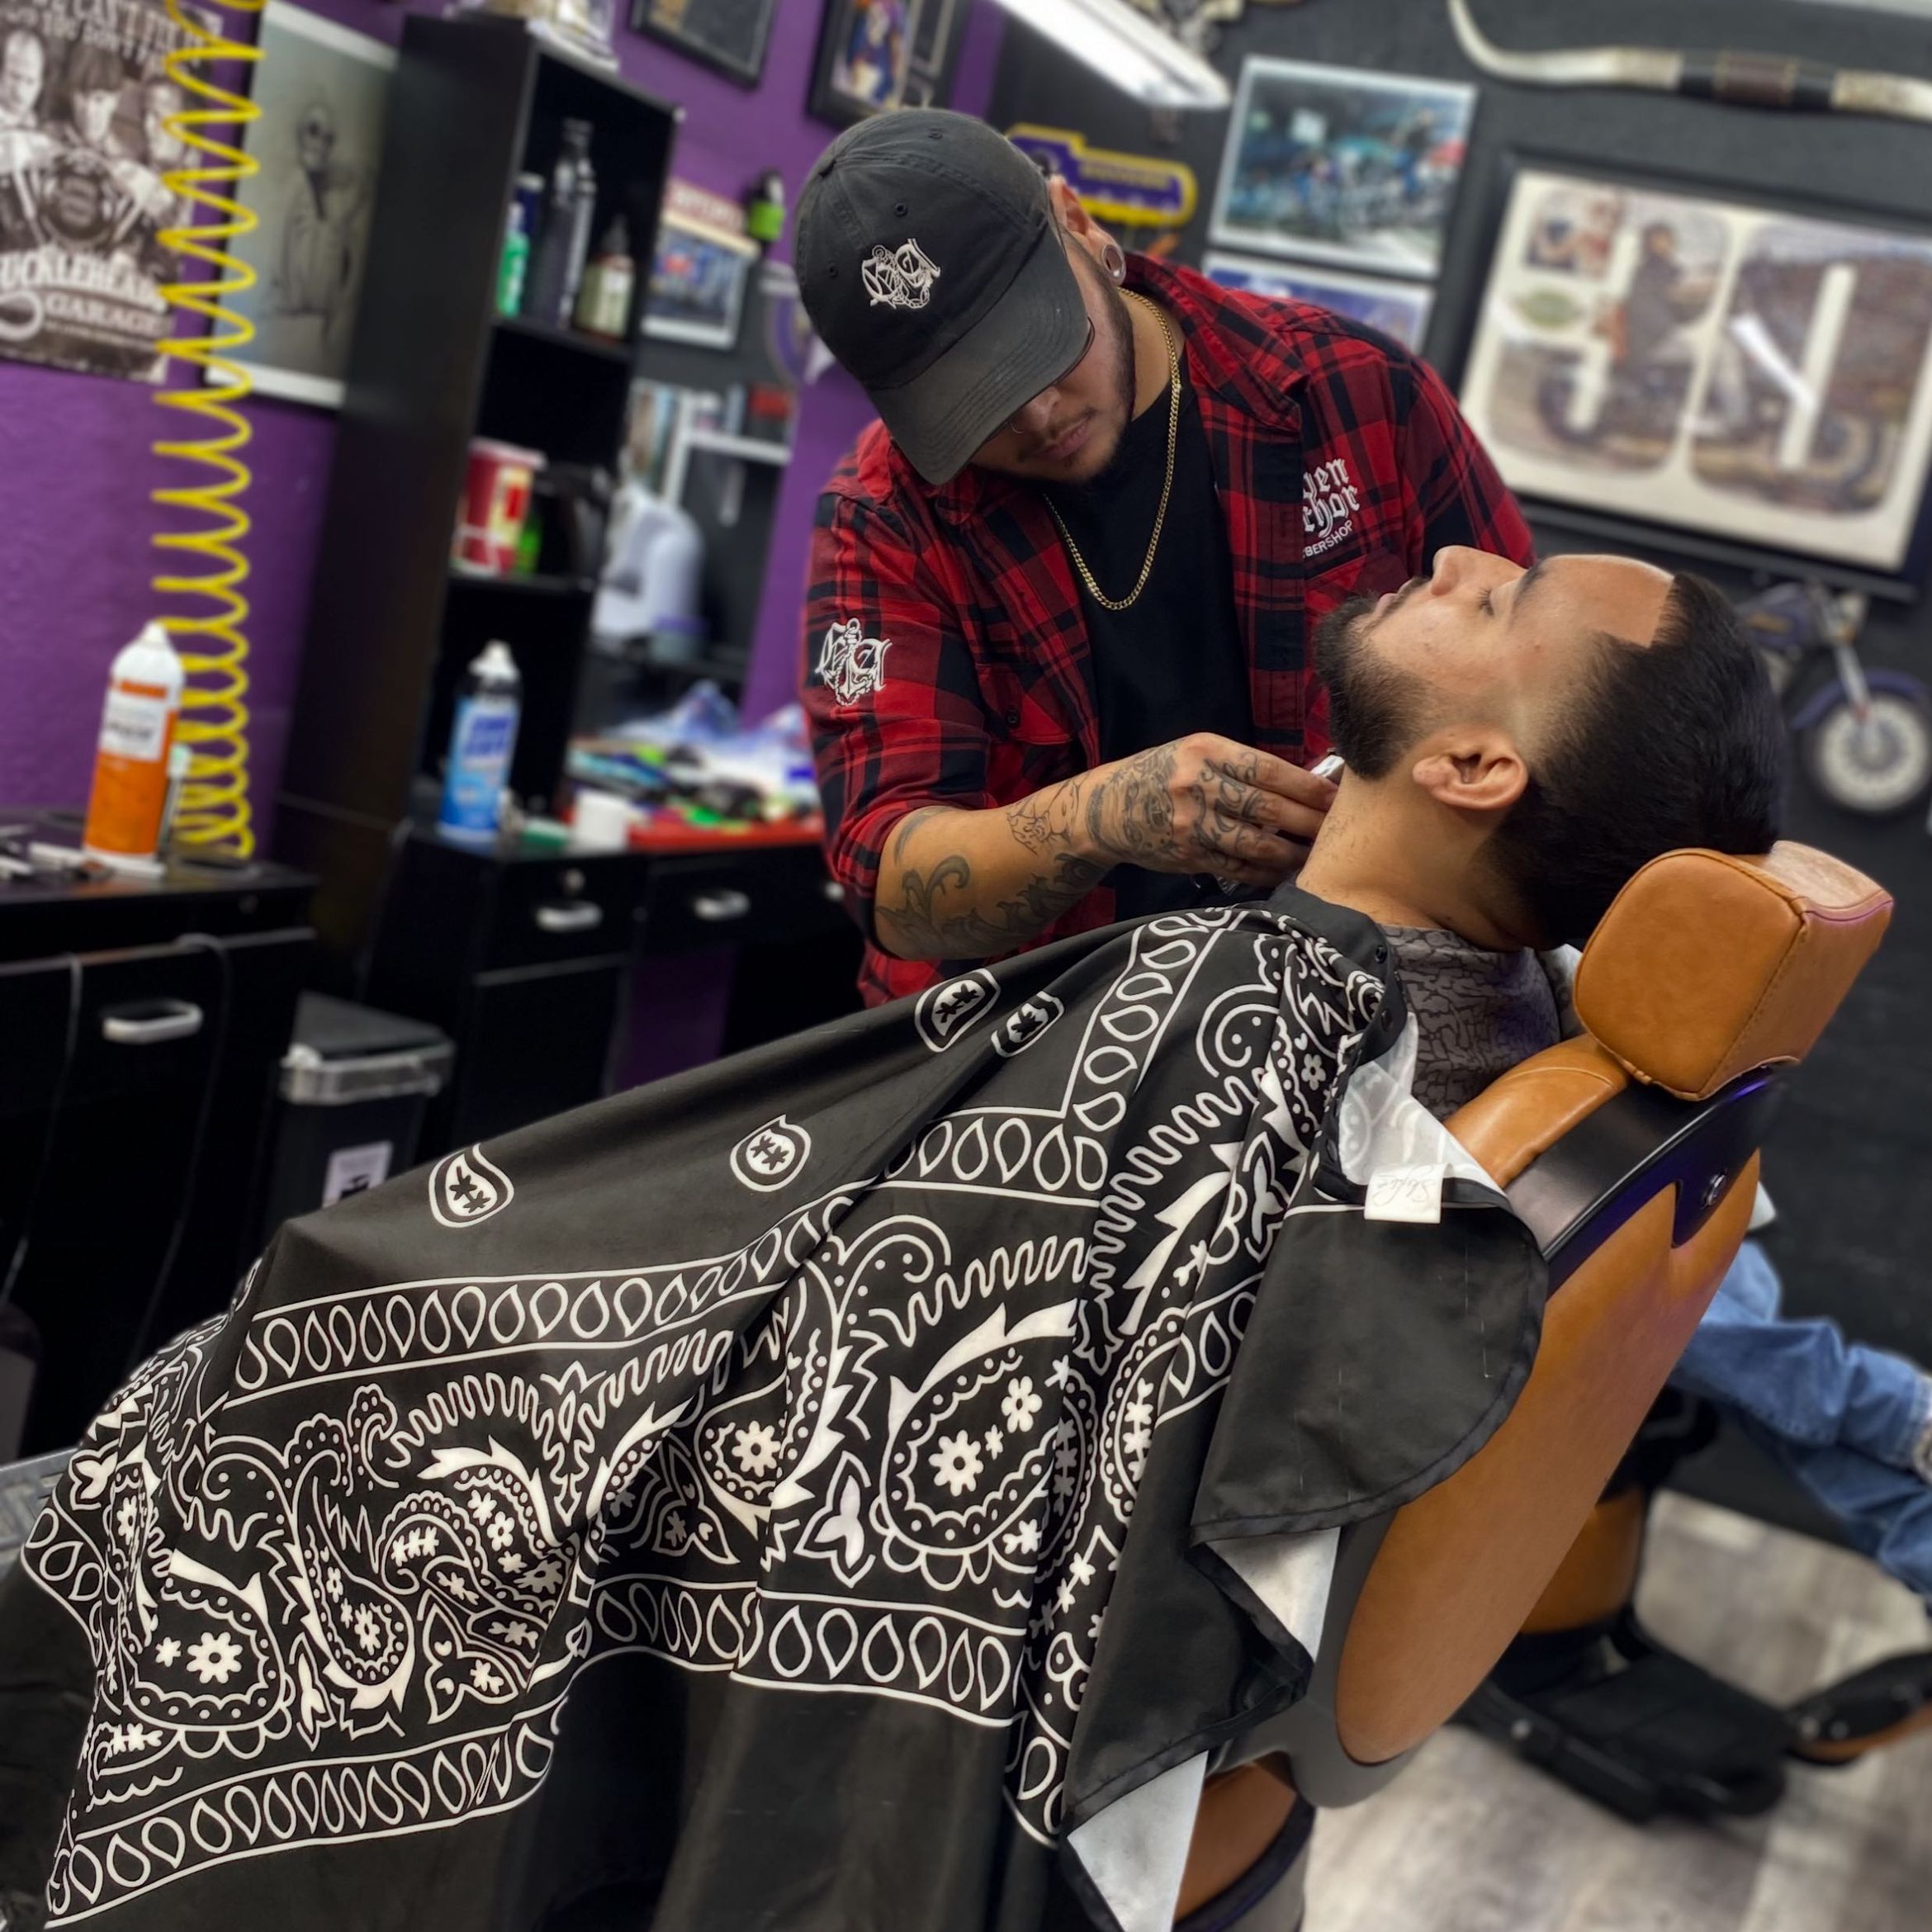 The Barber Parlor - Ryan R. Ramos, 608 Suit A South 25 Mile Ave, Hereford, 79045